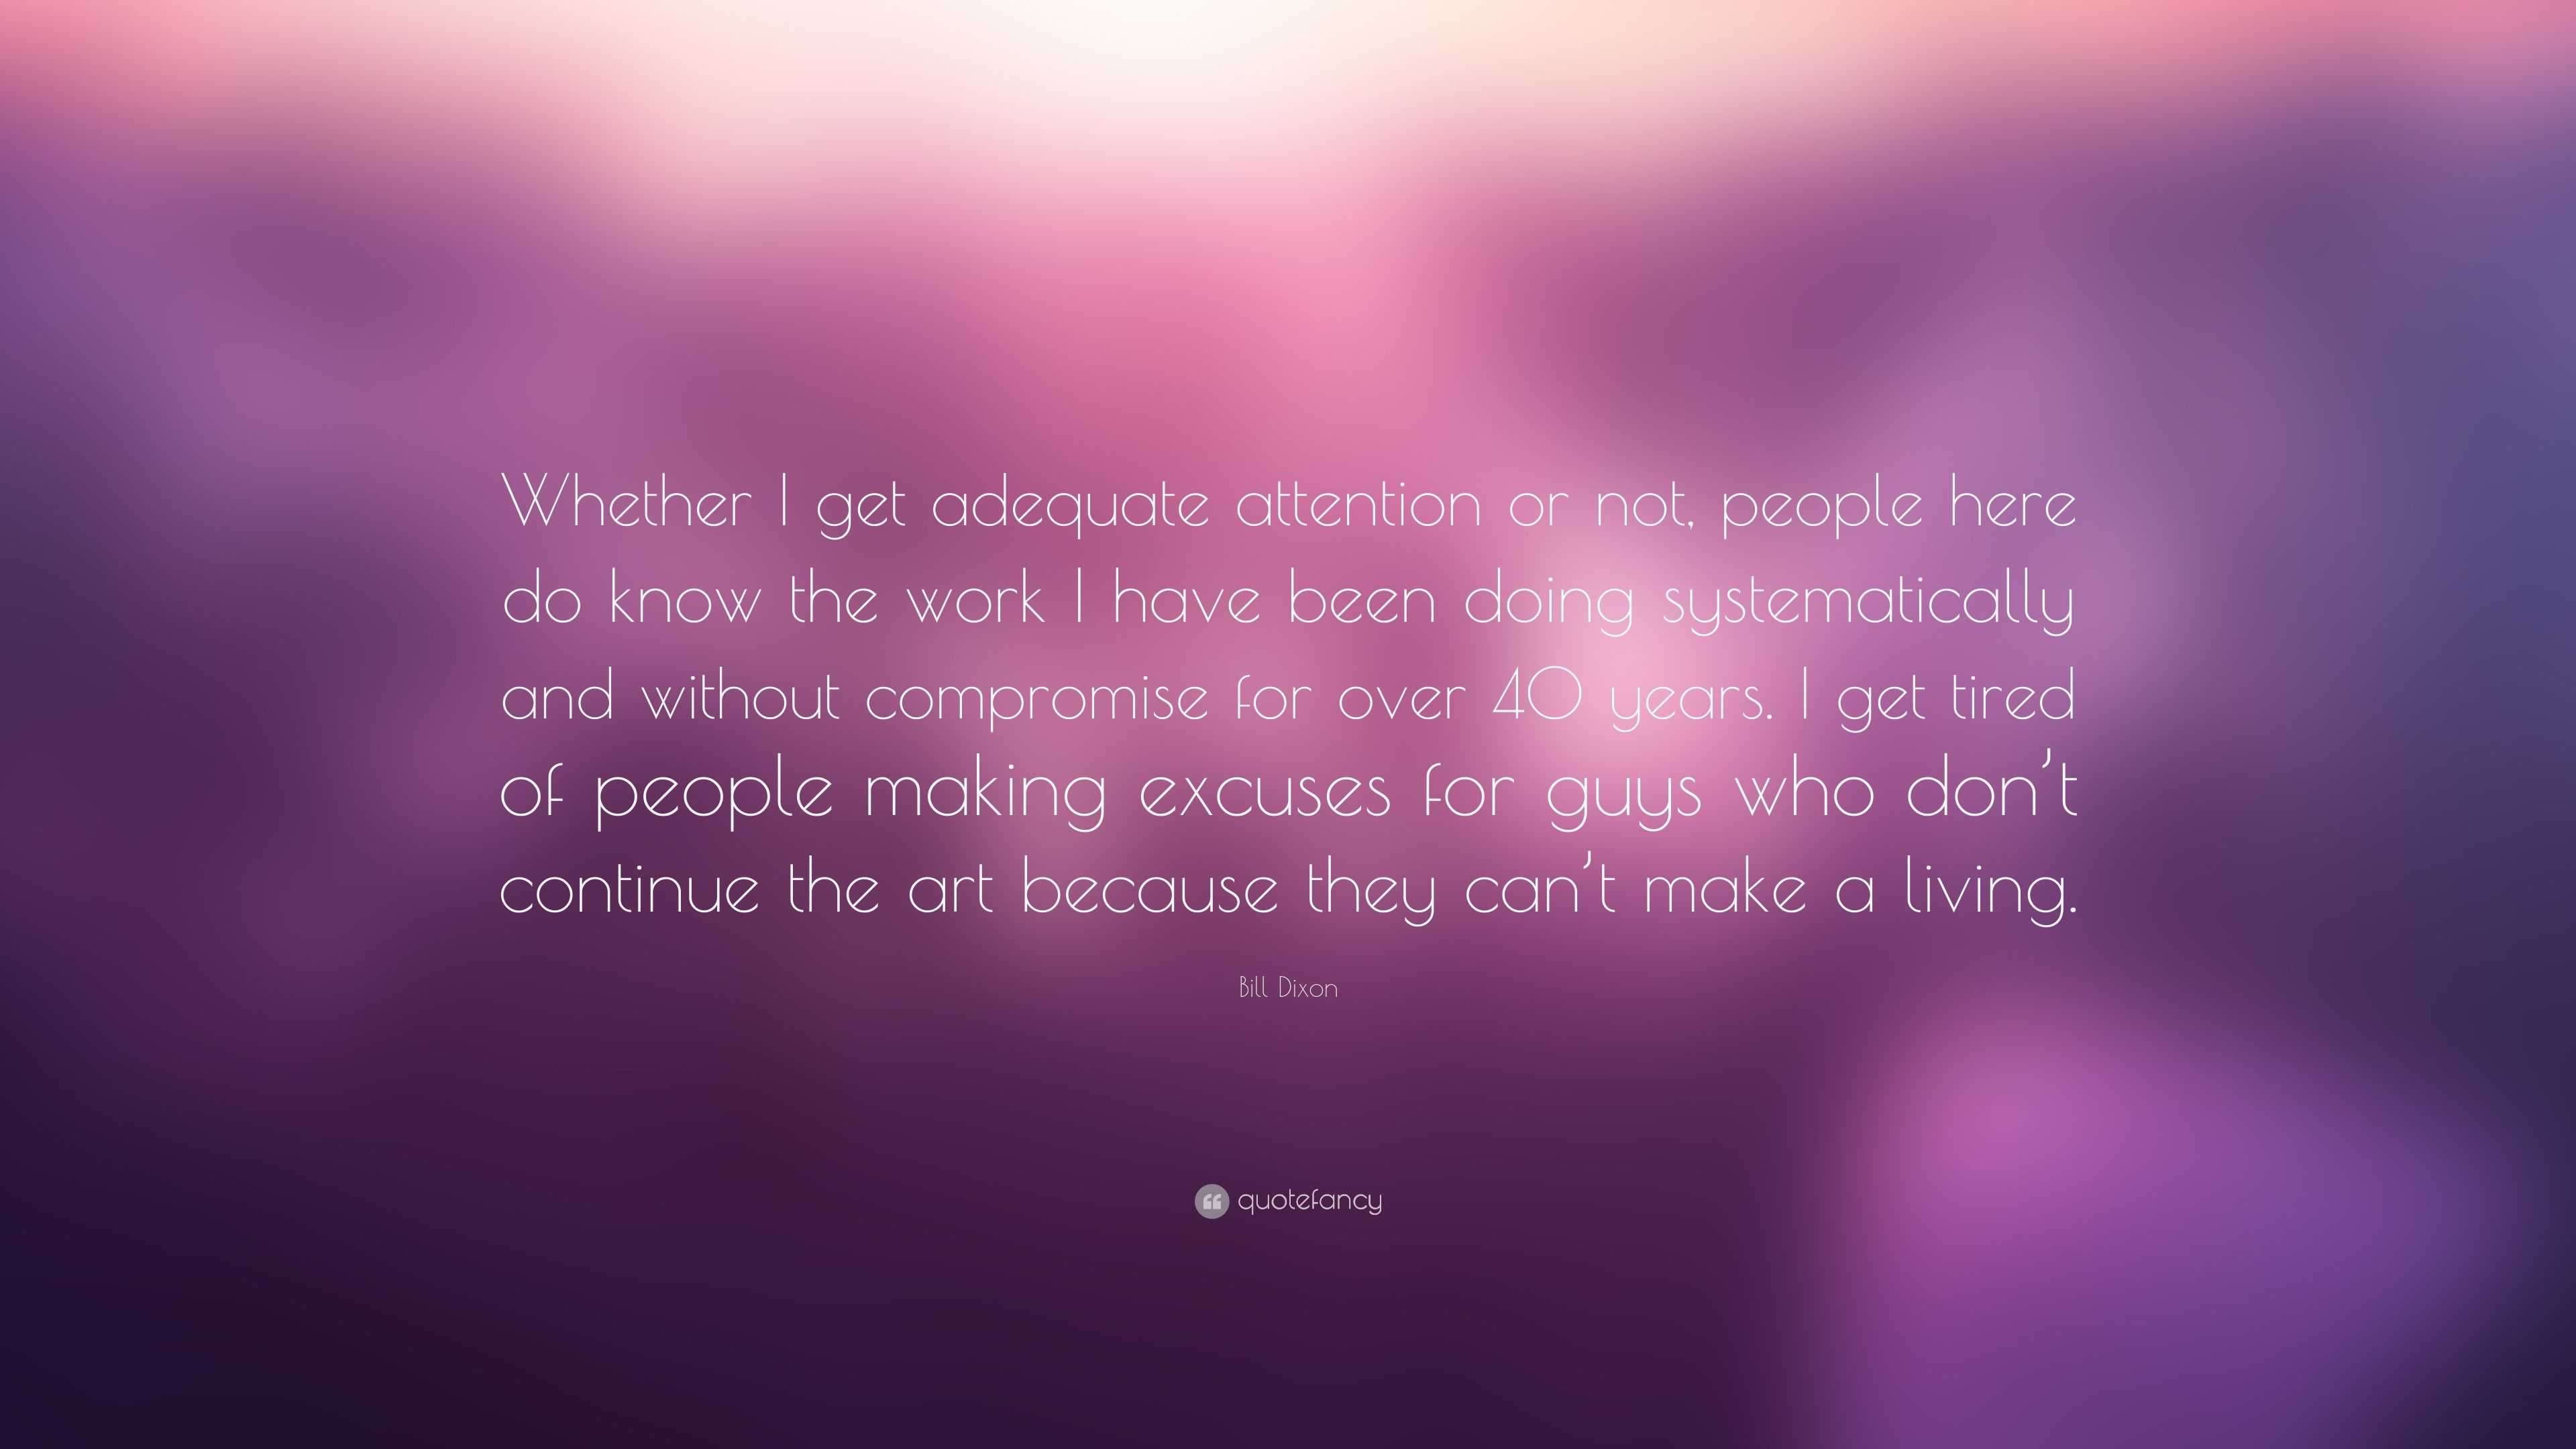 Bill Dixon Quote: “Whether I get adequate attention or not, people here ...